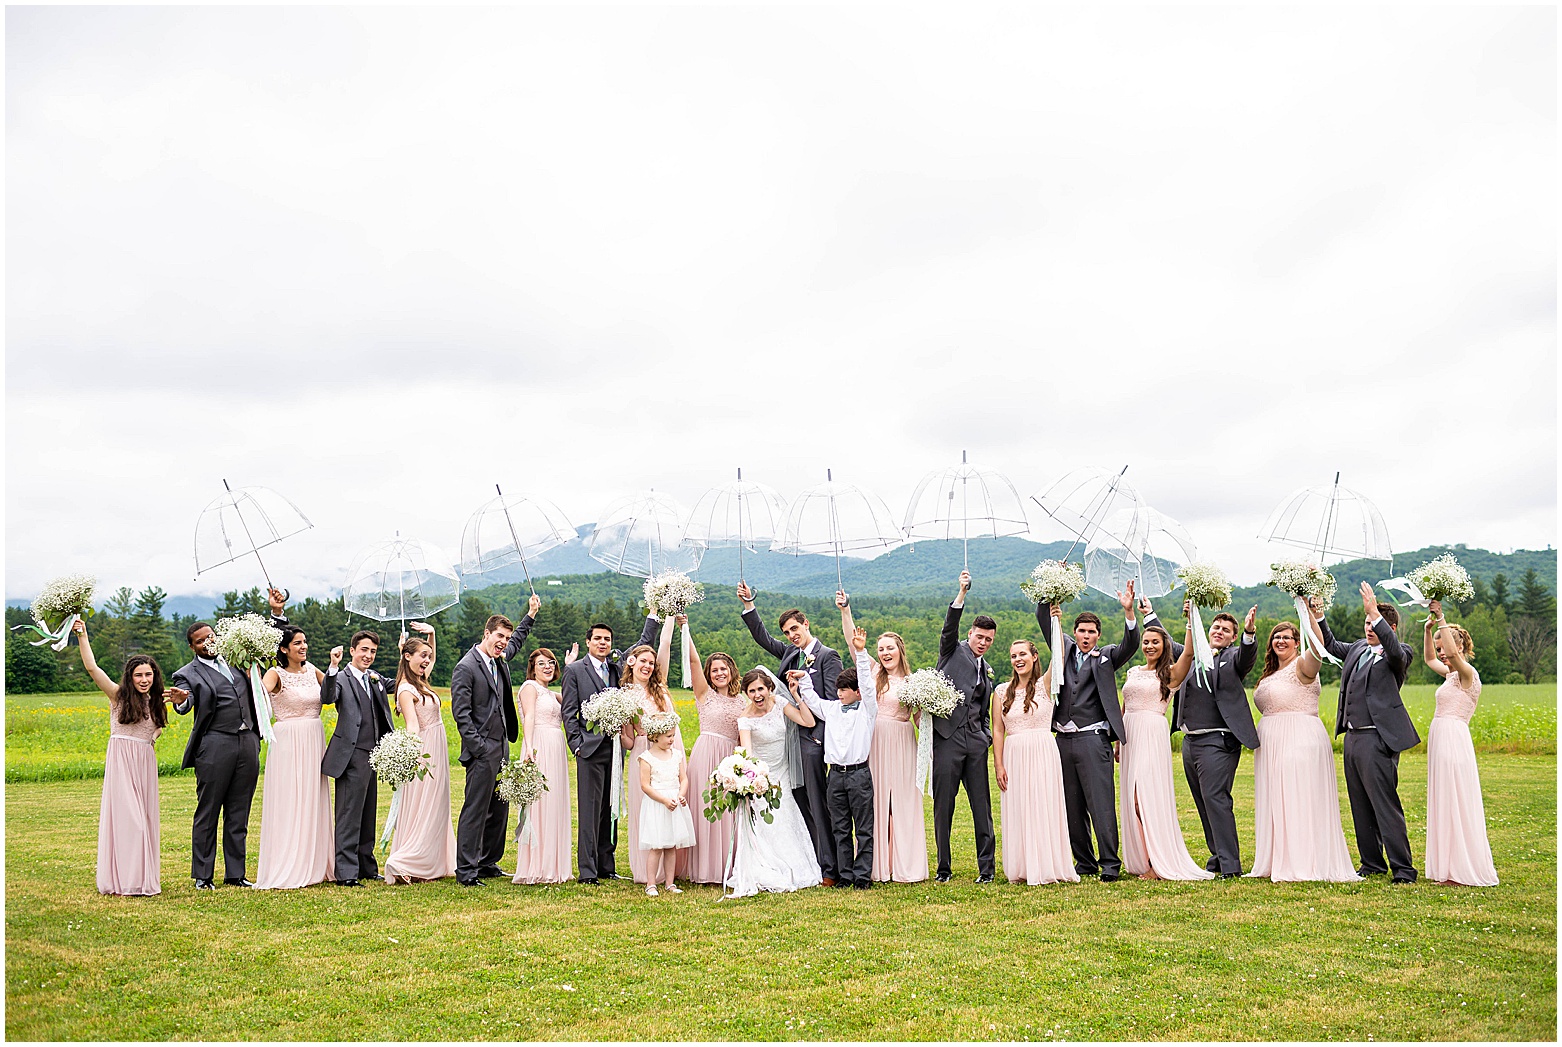 View More: http://hopetaylorphotographyphotos.pass.us/chelsea-kaye-and-neal-wedding